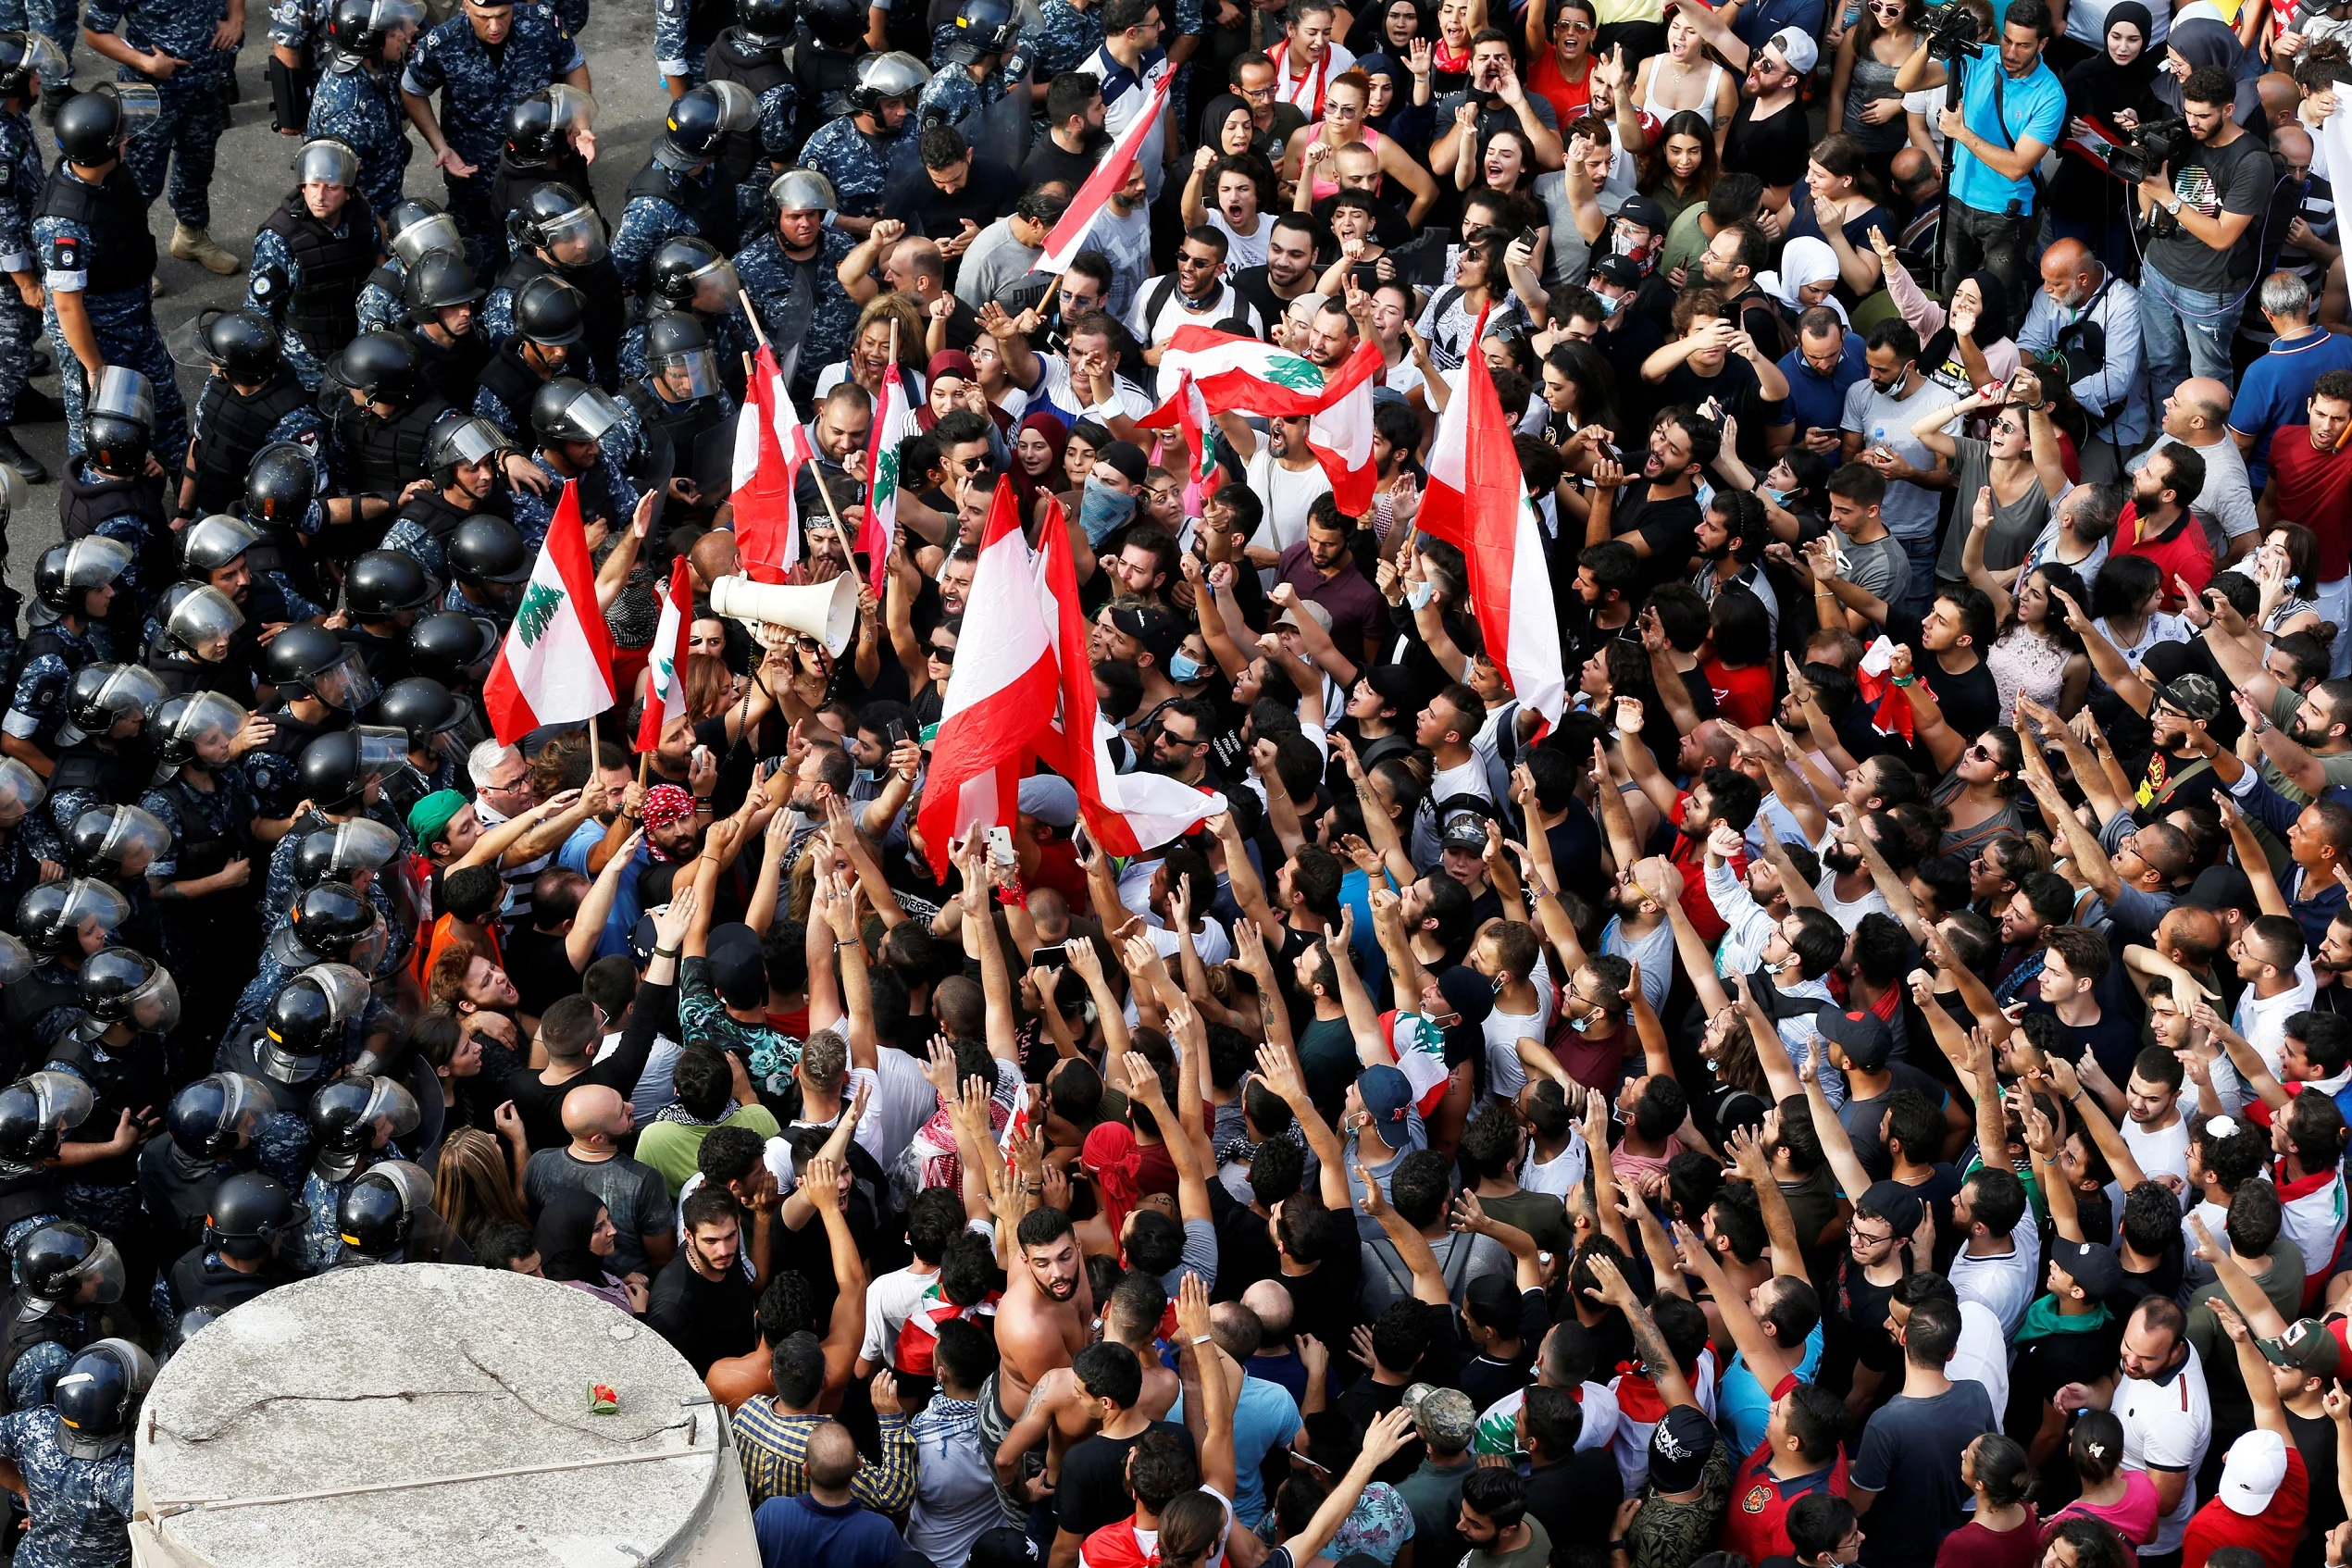 Protest Over Deteriorating Economic Situation In Beirut